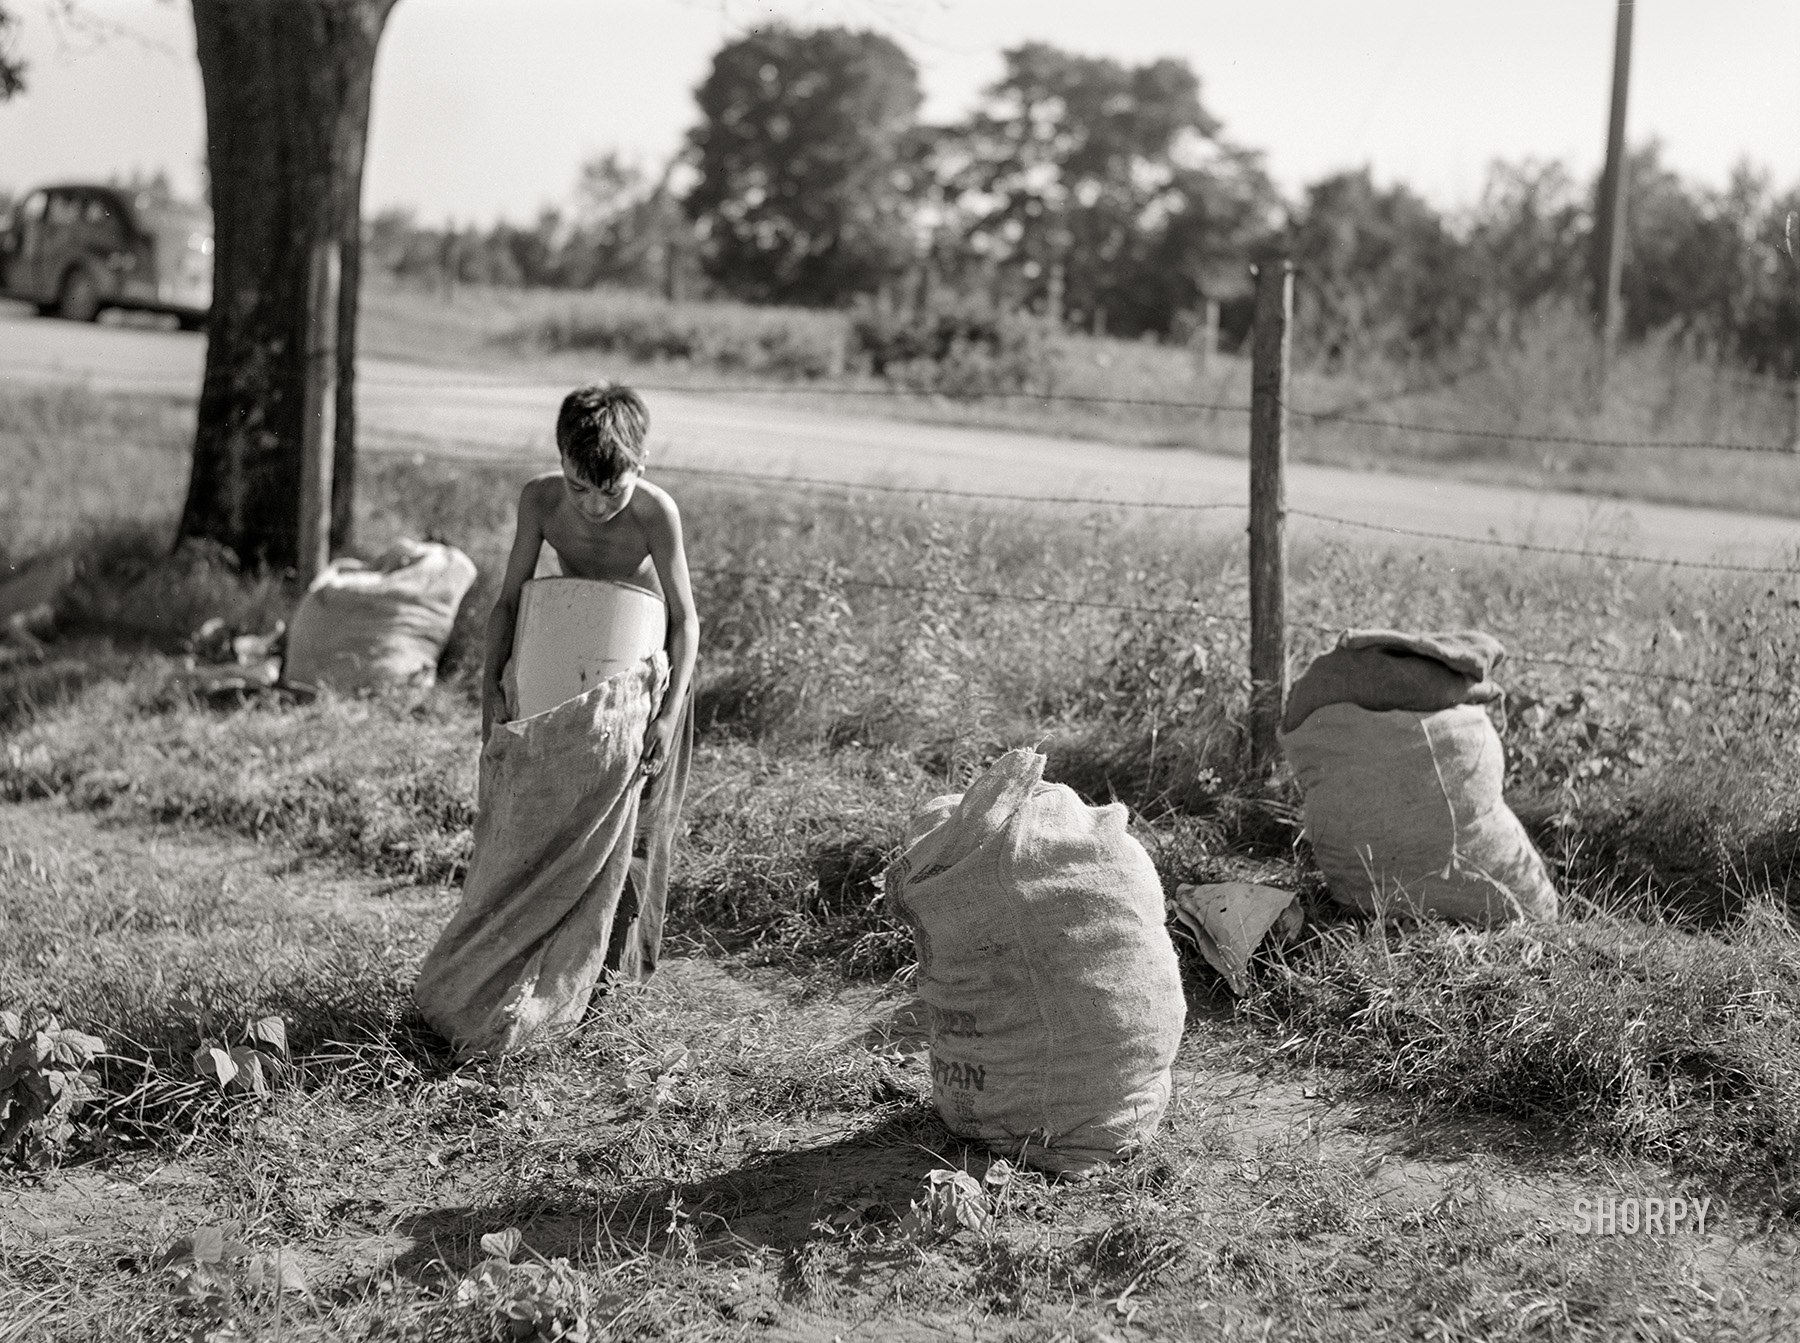 August 1941. "Boy emptying beans into sack. Shawano County, Wisconsin." Medium format acetate negative by John Vachon for the Farm Security Administration. View full size.